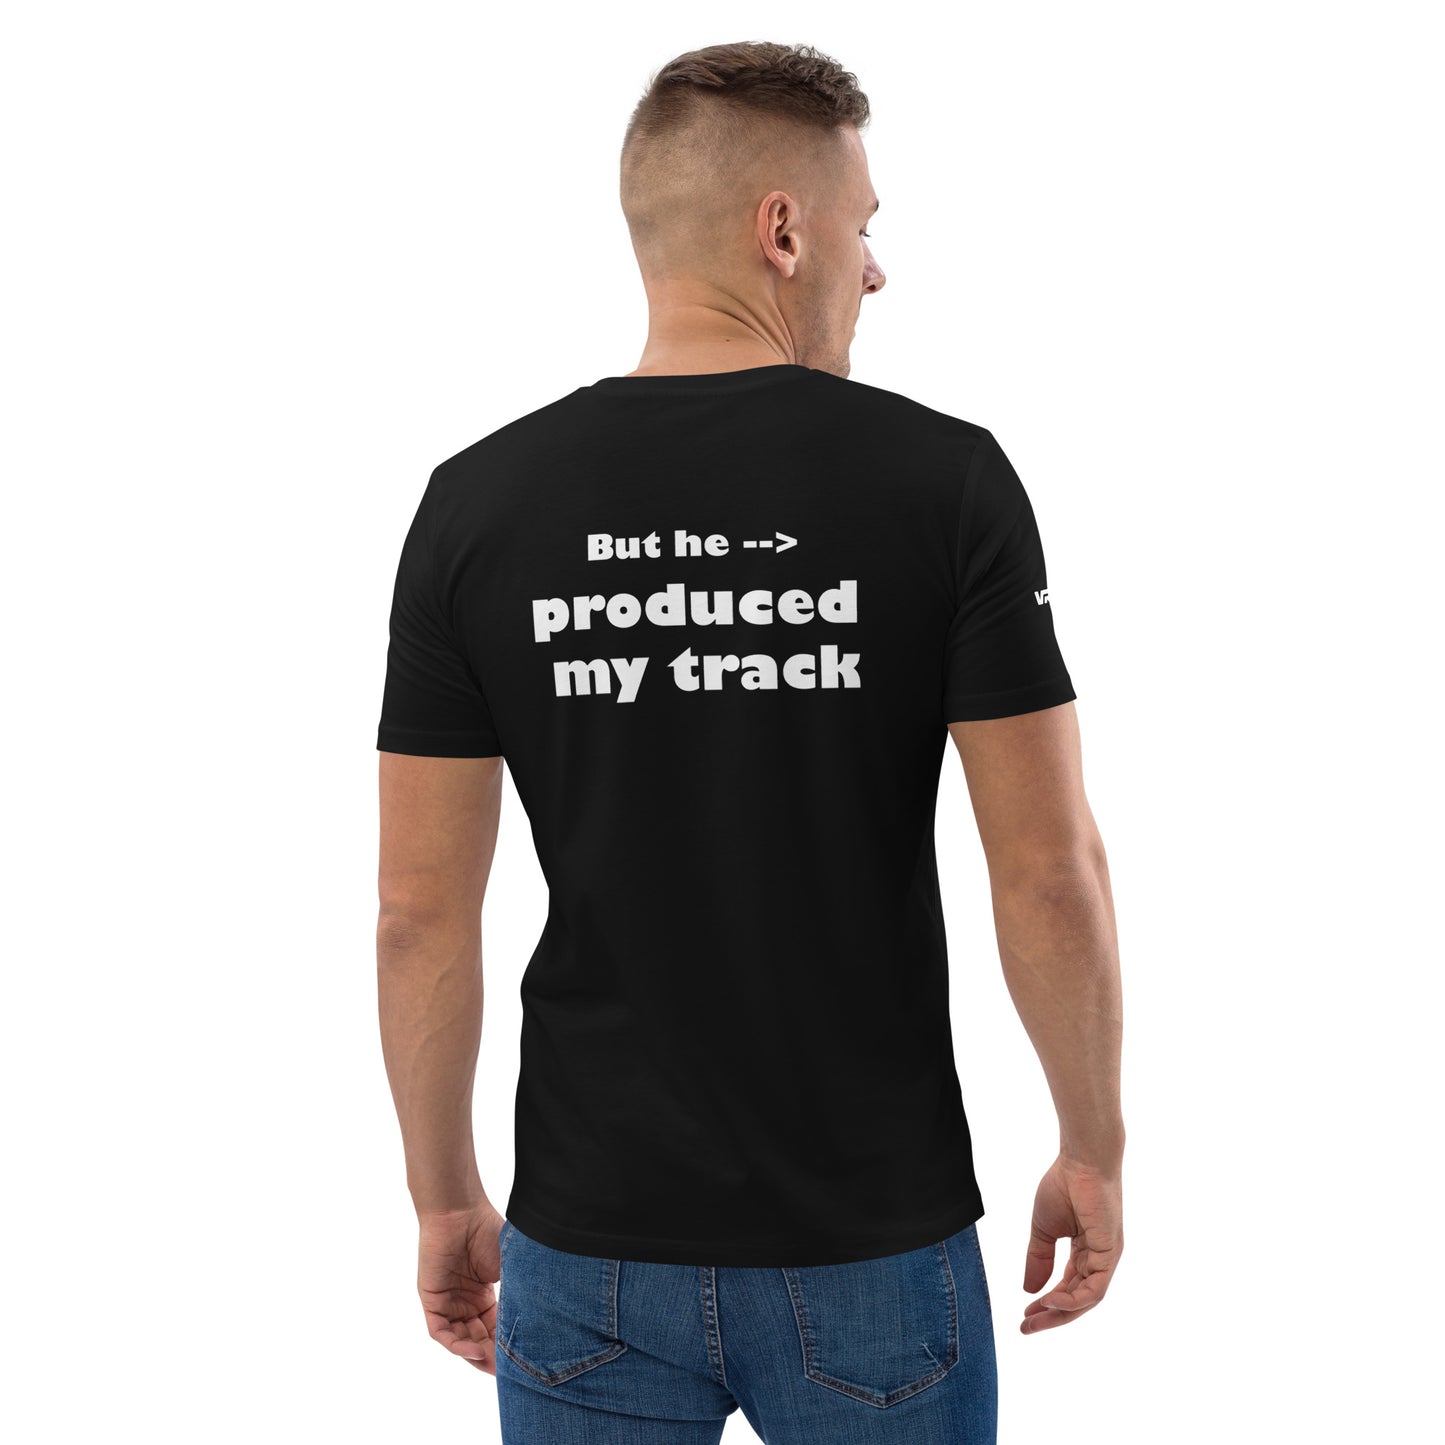 I am the DJ, but he produced my track. Unisex organic cotton t-shirt